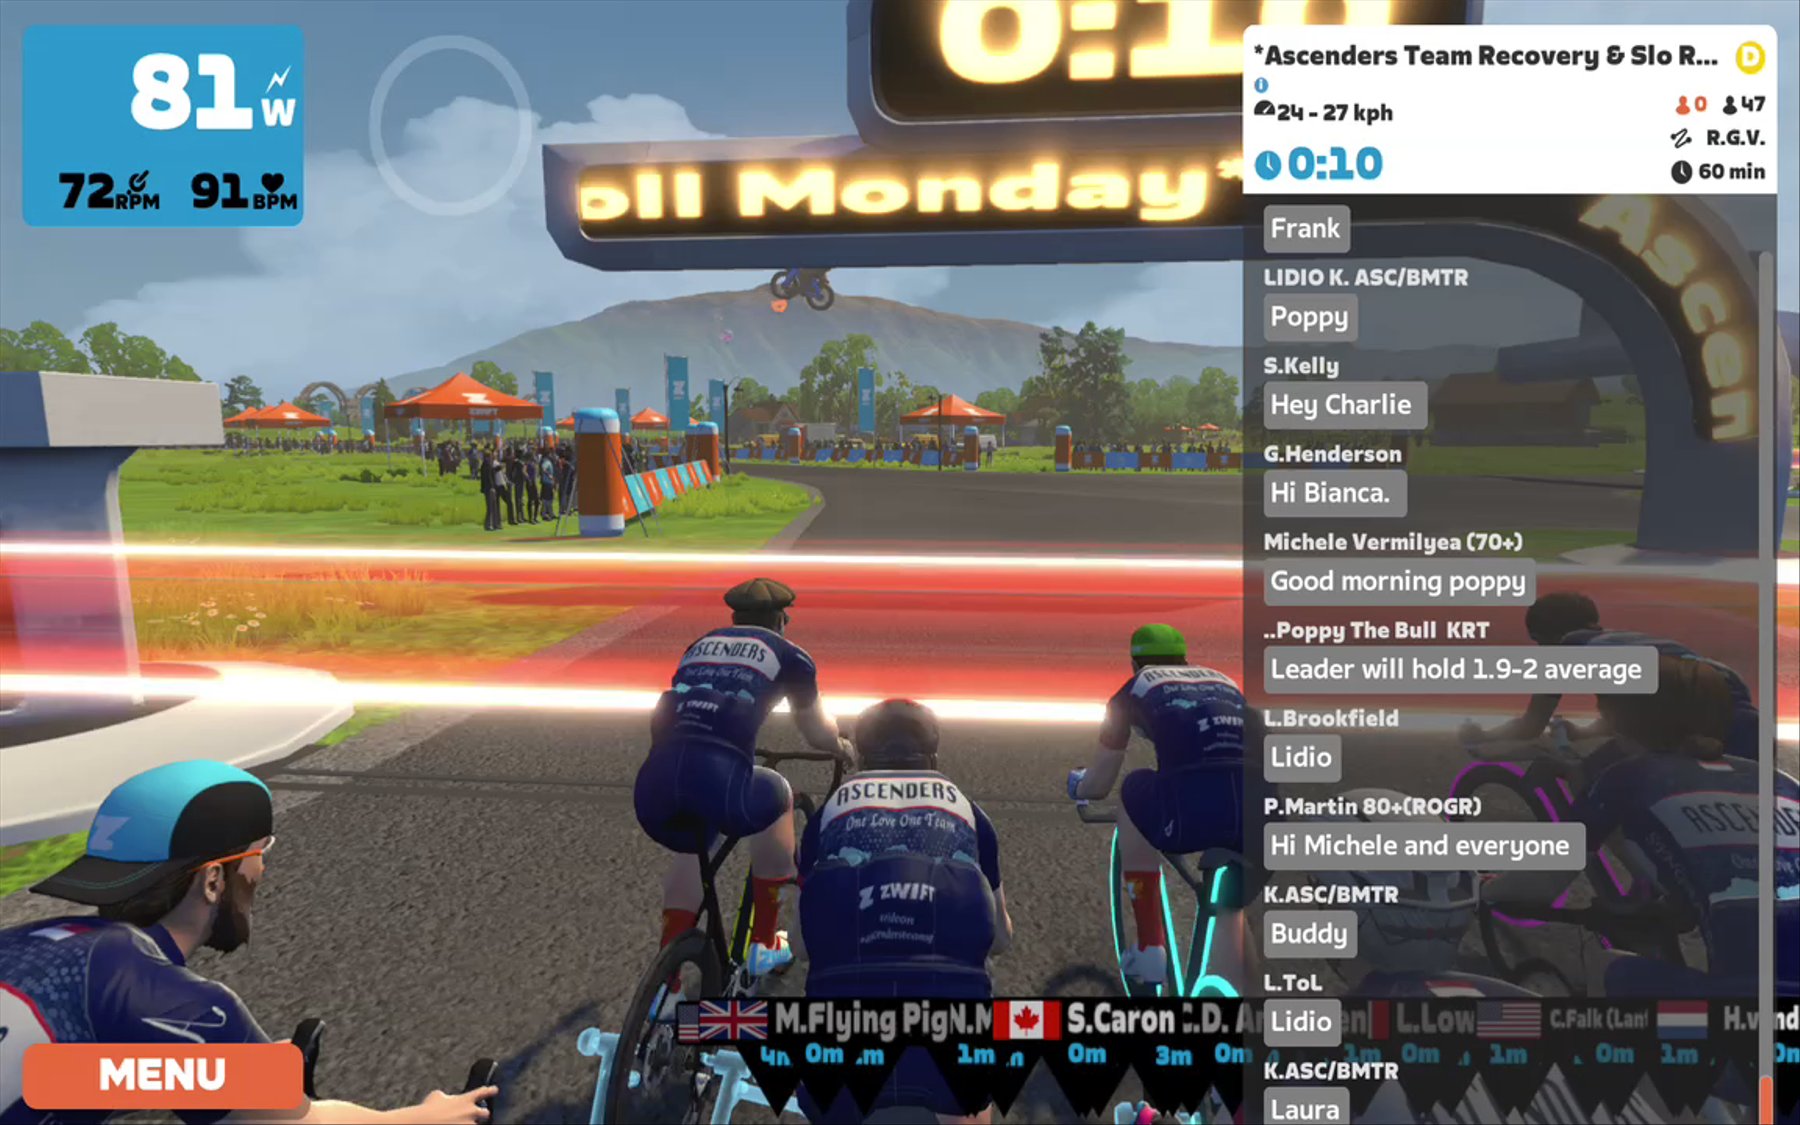 Zwift - Group Ride: *Ascenders Team Recovery & Slo Roll Monday* (D) on R.G.V. in France